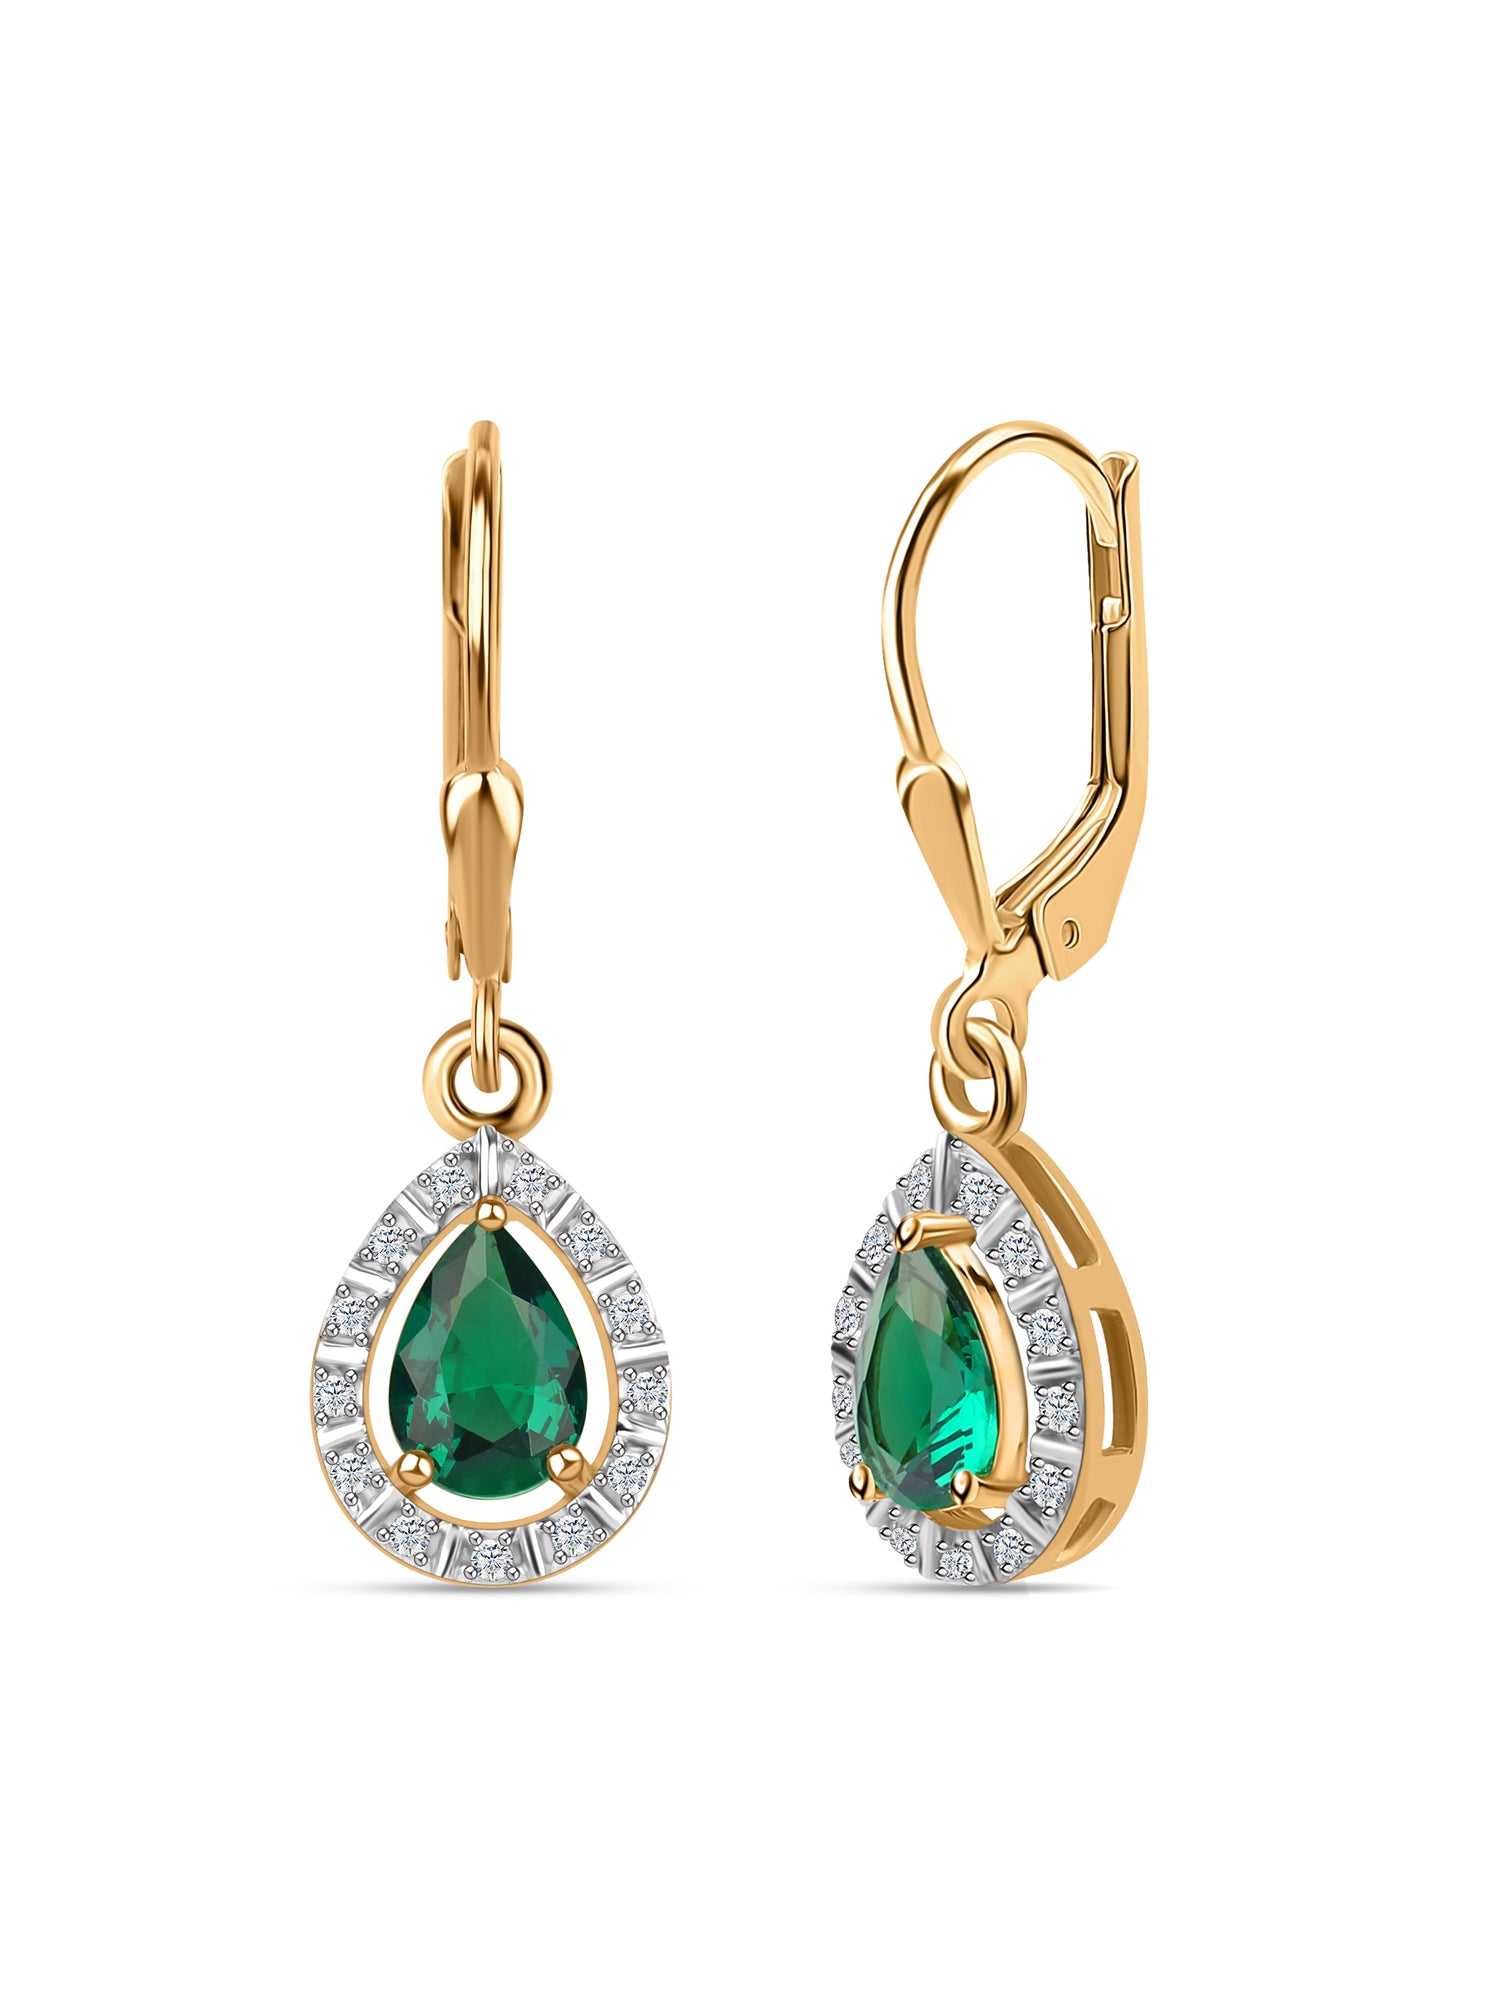 Green Emerald Dangle Earrings with Lever Back